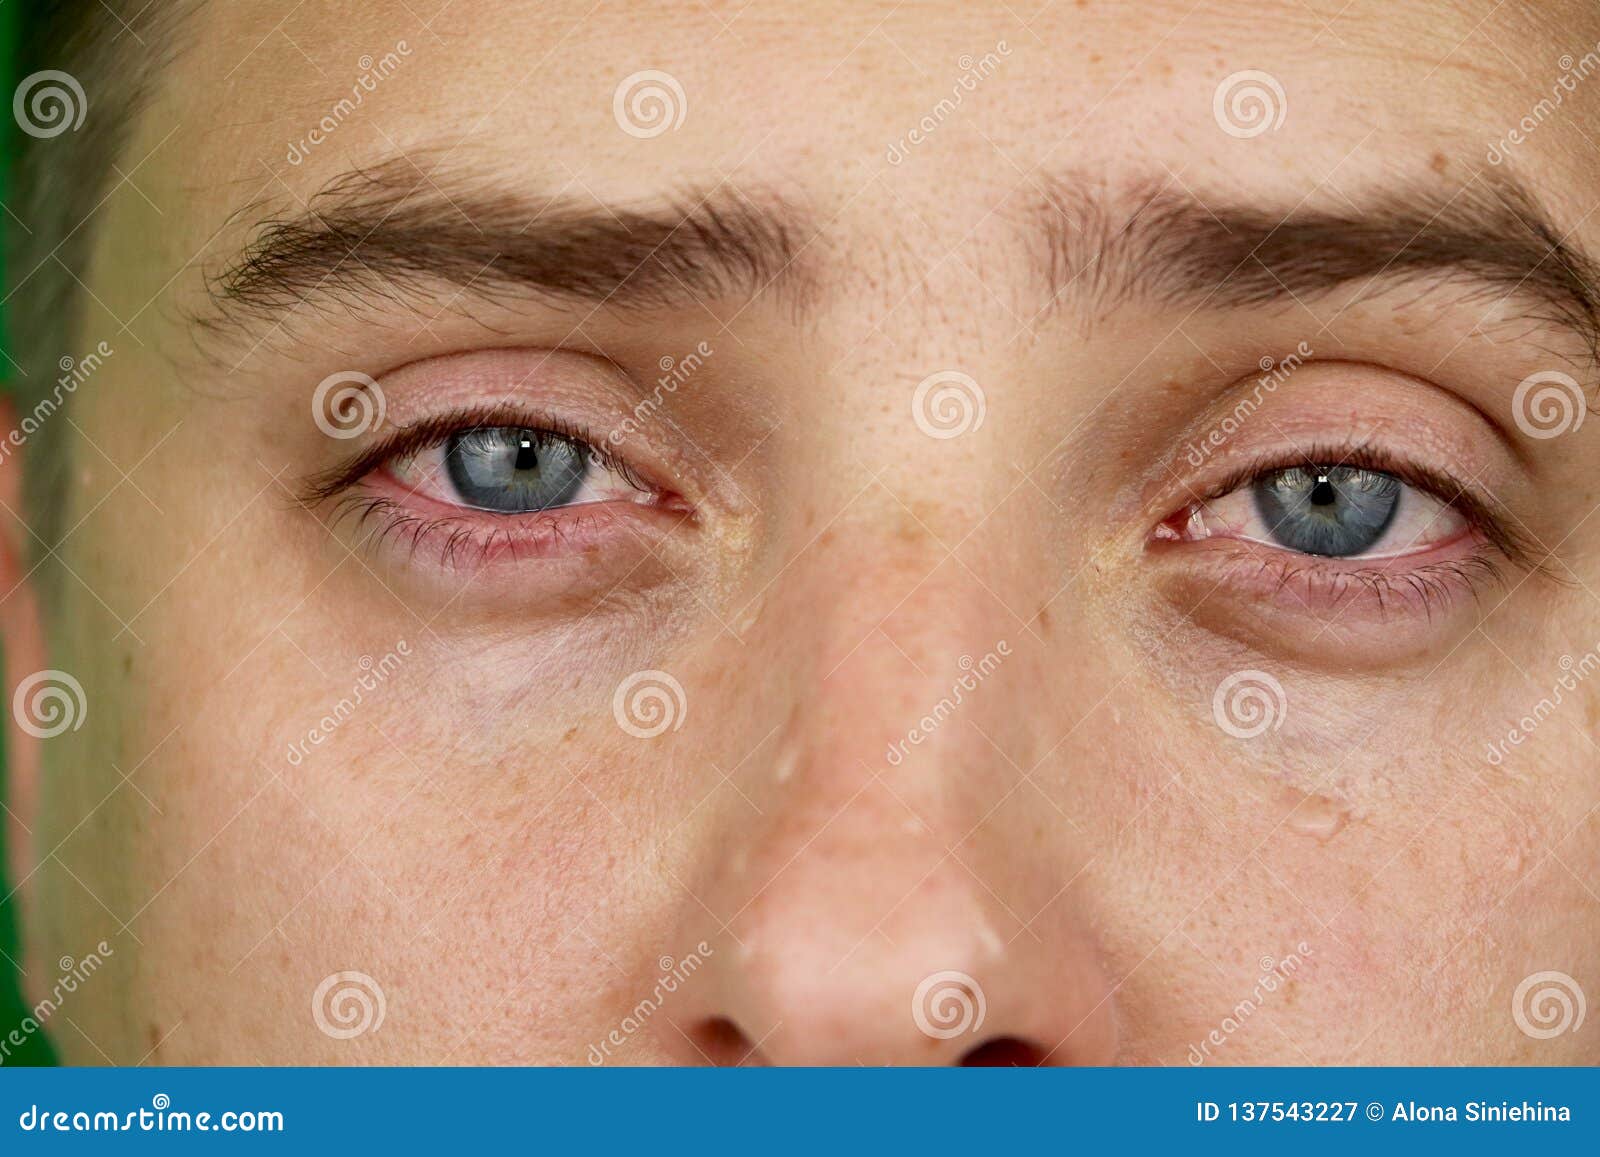 Tears in Eyes of Crying Adult Man. Green Background Stock Image ...